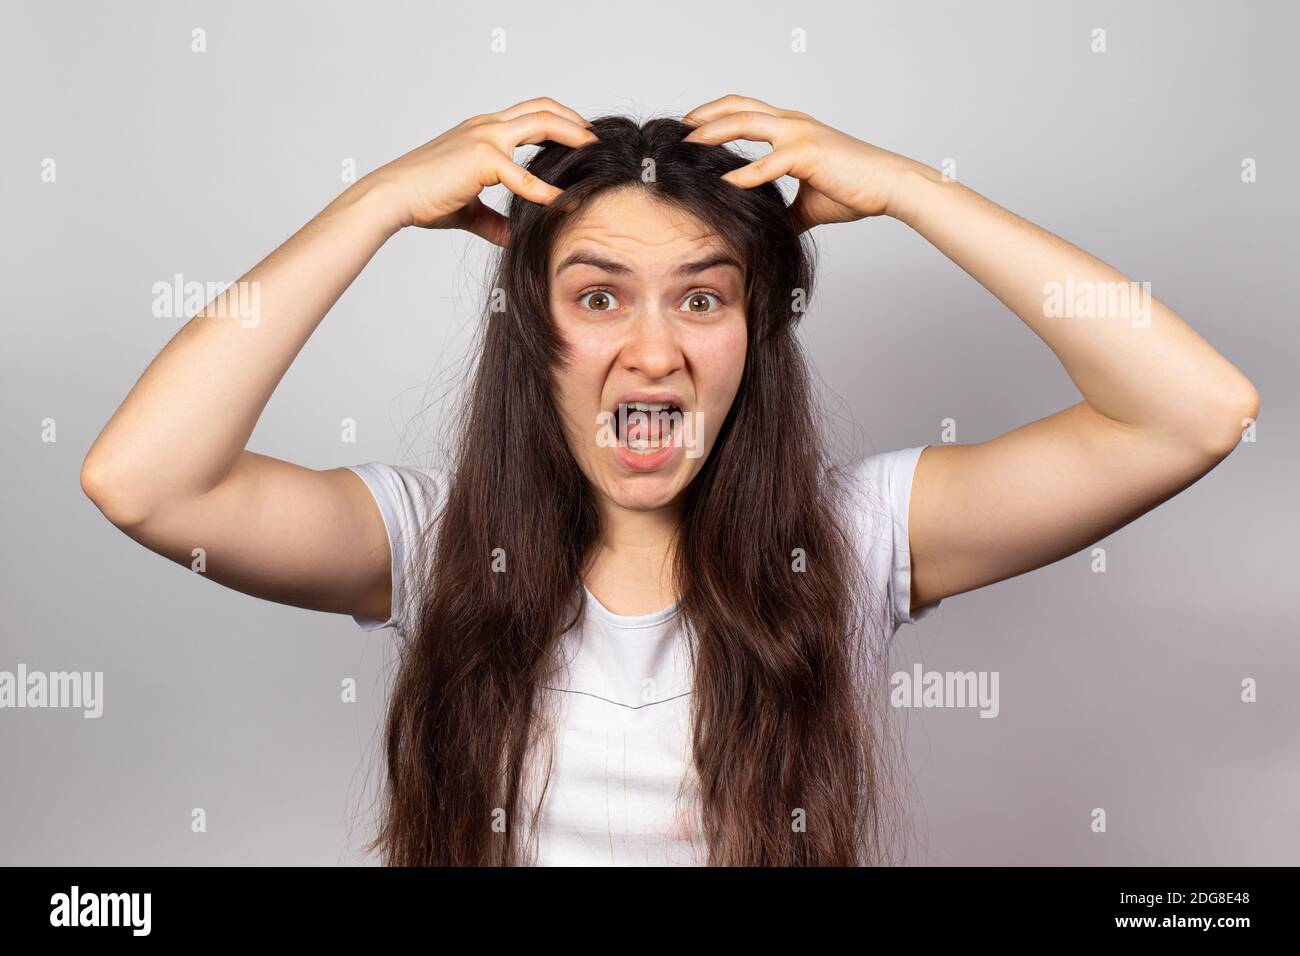 The girl grabbed her head and screams for problems with dandruff and hair loss. Scalp fungus, stress and baldness, skin itching. Stock Photo